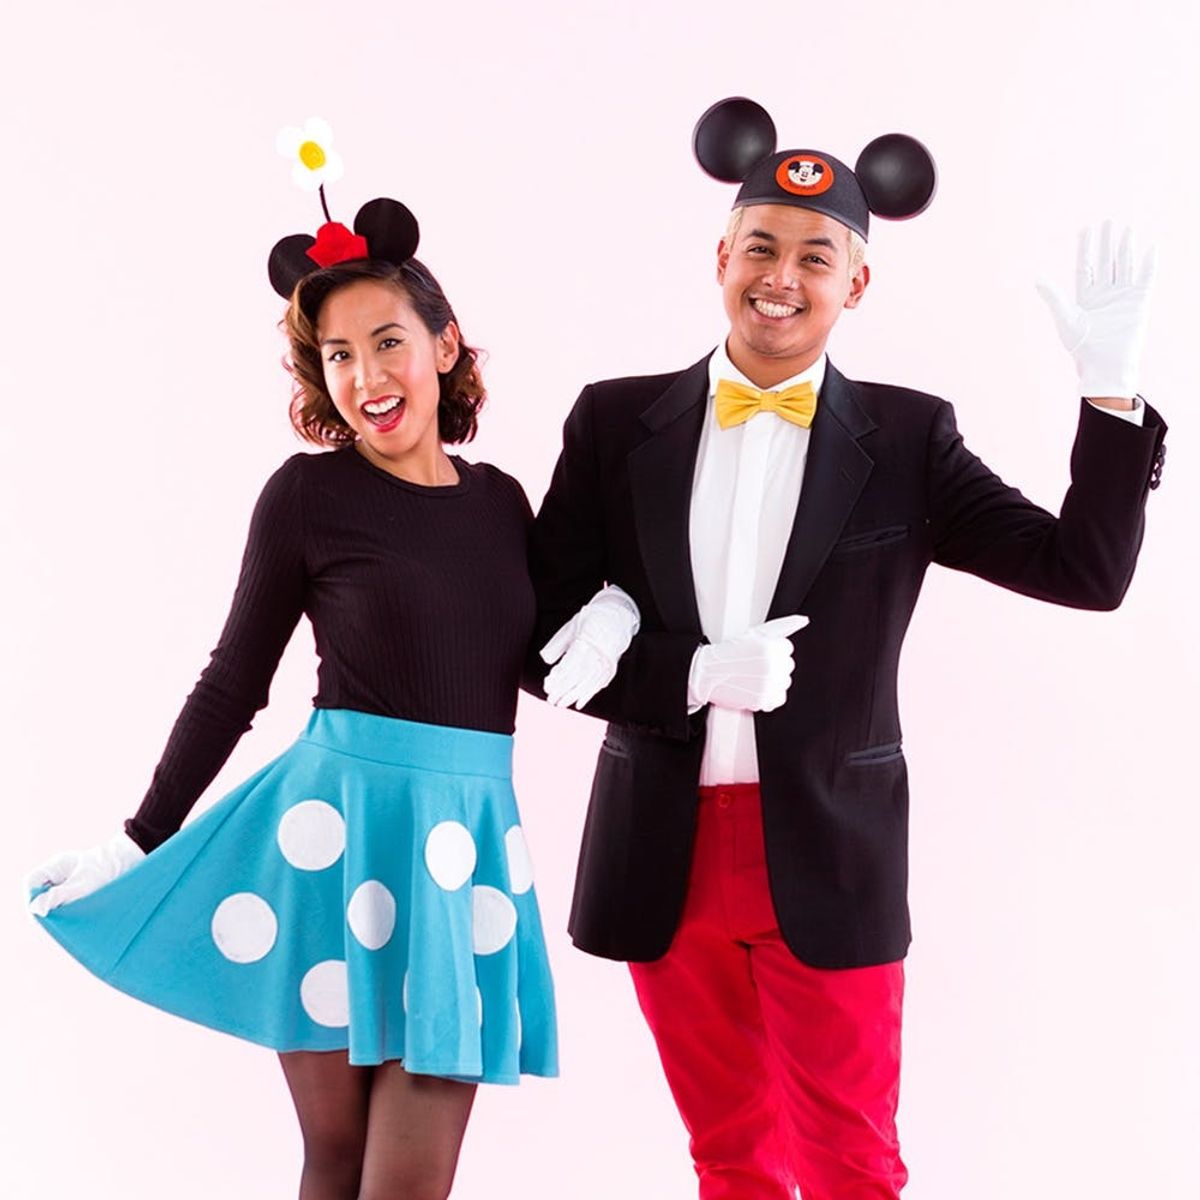 This Mickey and Minnie Mouse Halloween Costume Has #CouplesGoals All Over It